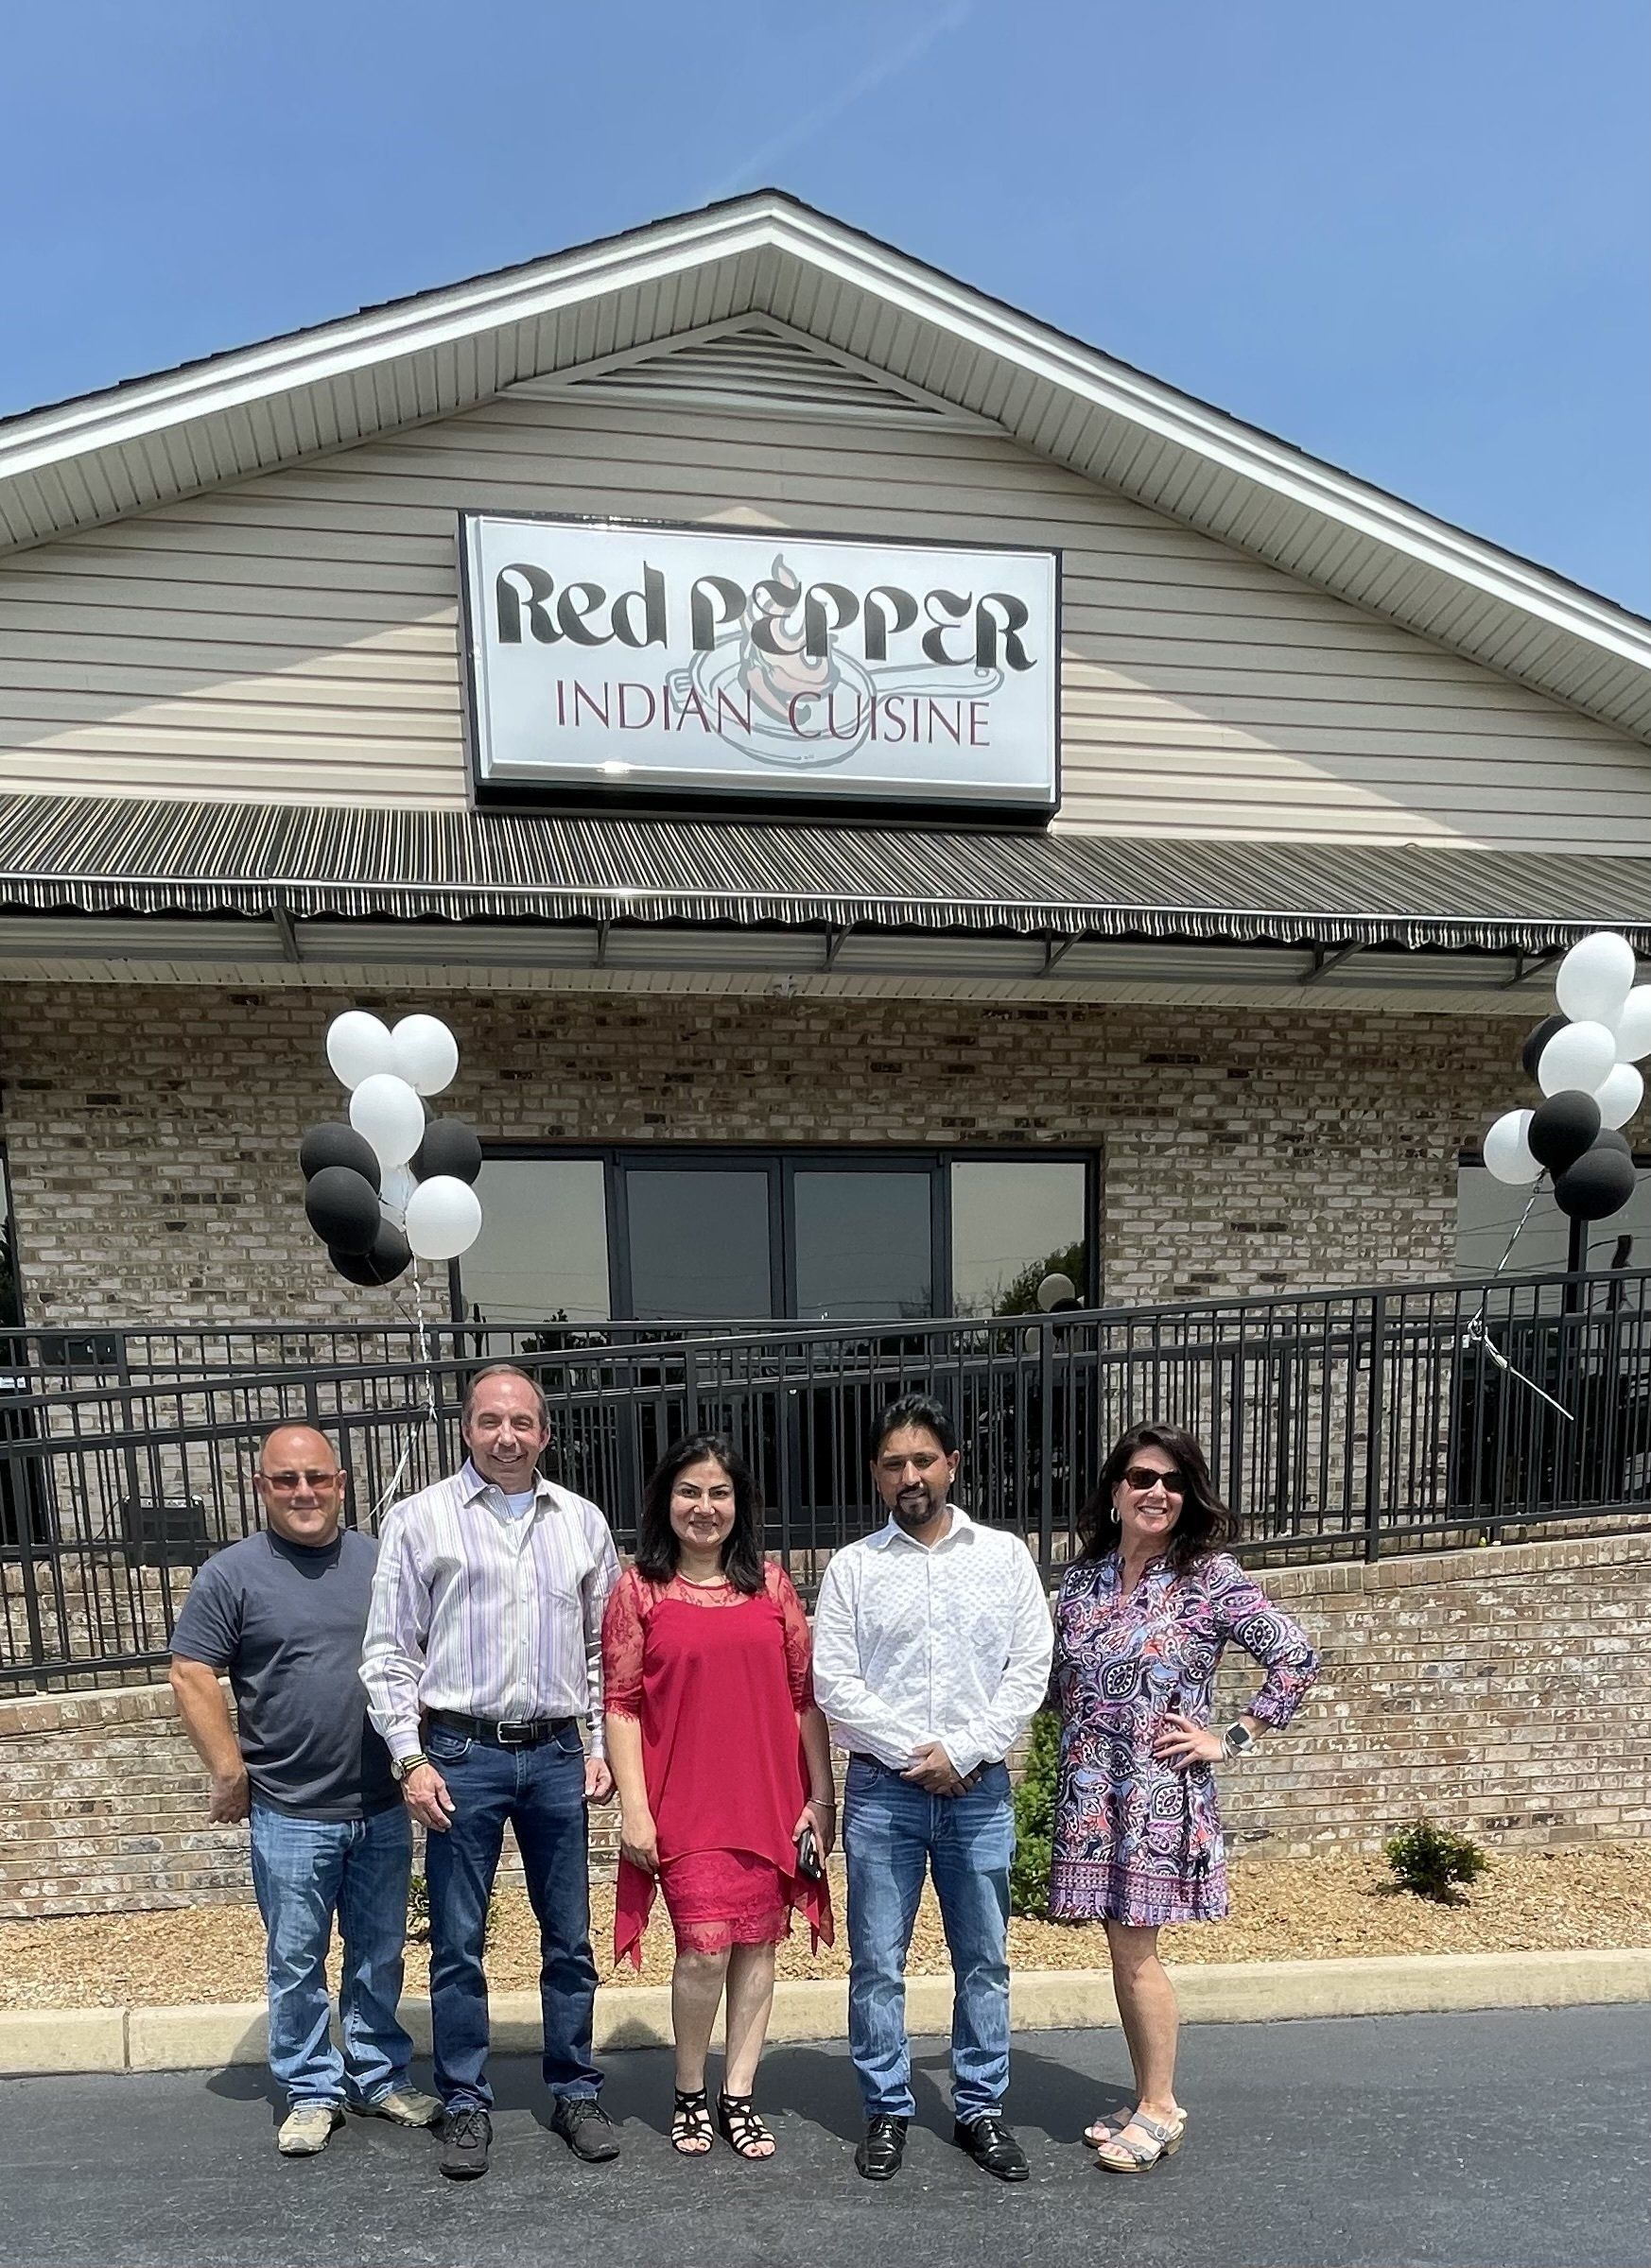 Opening Day Celebration for Red Pepper Indian Cuisine